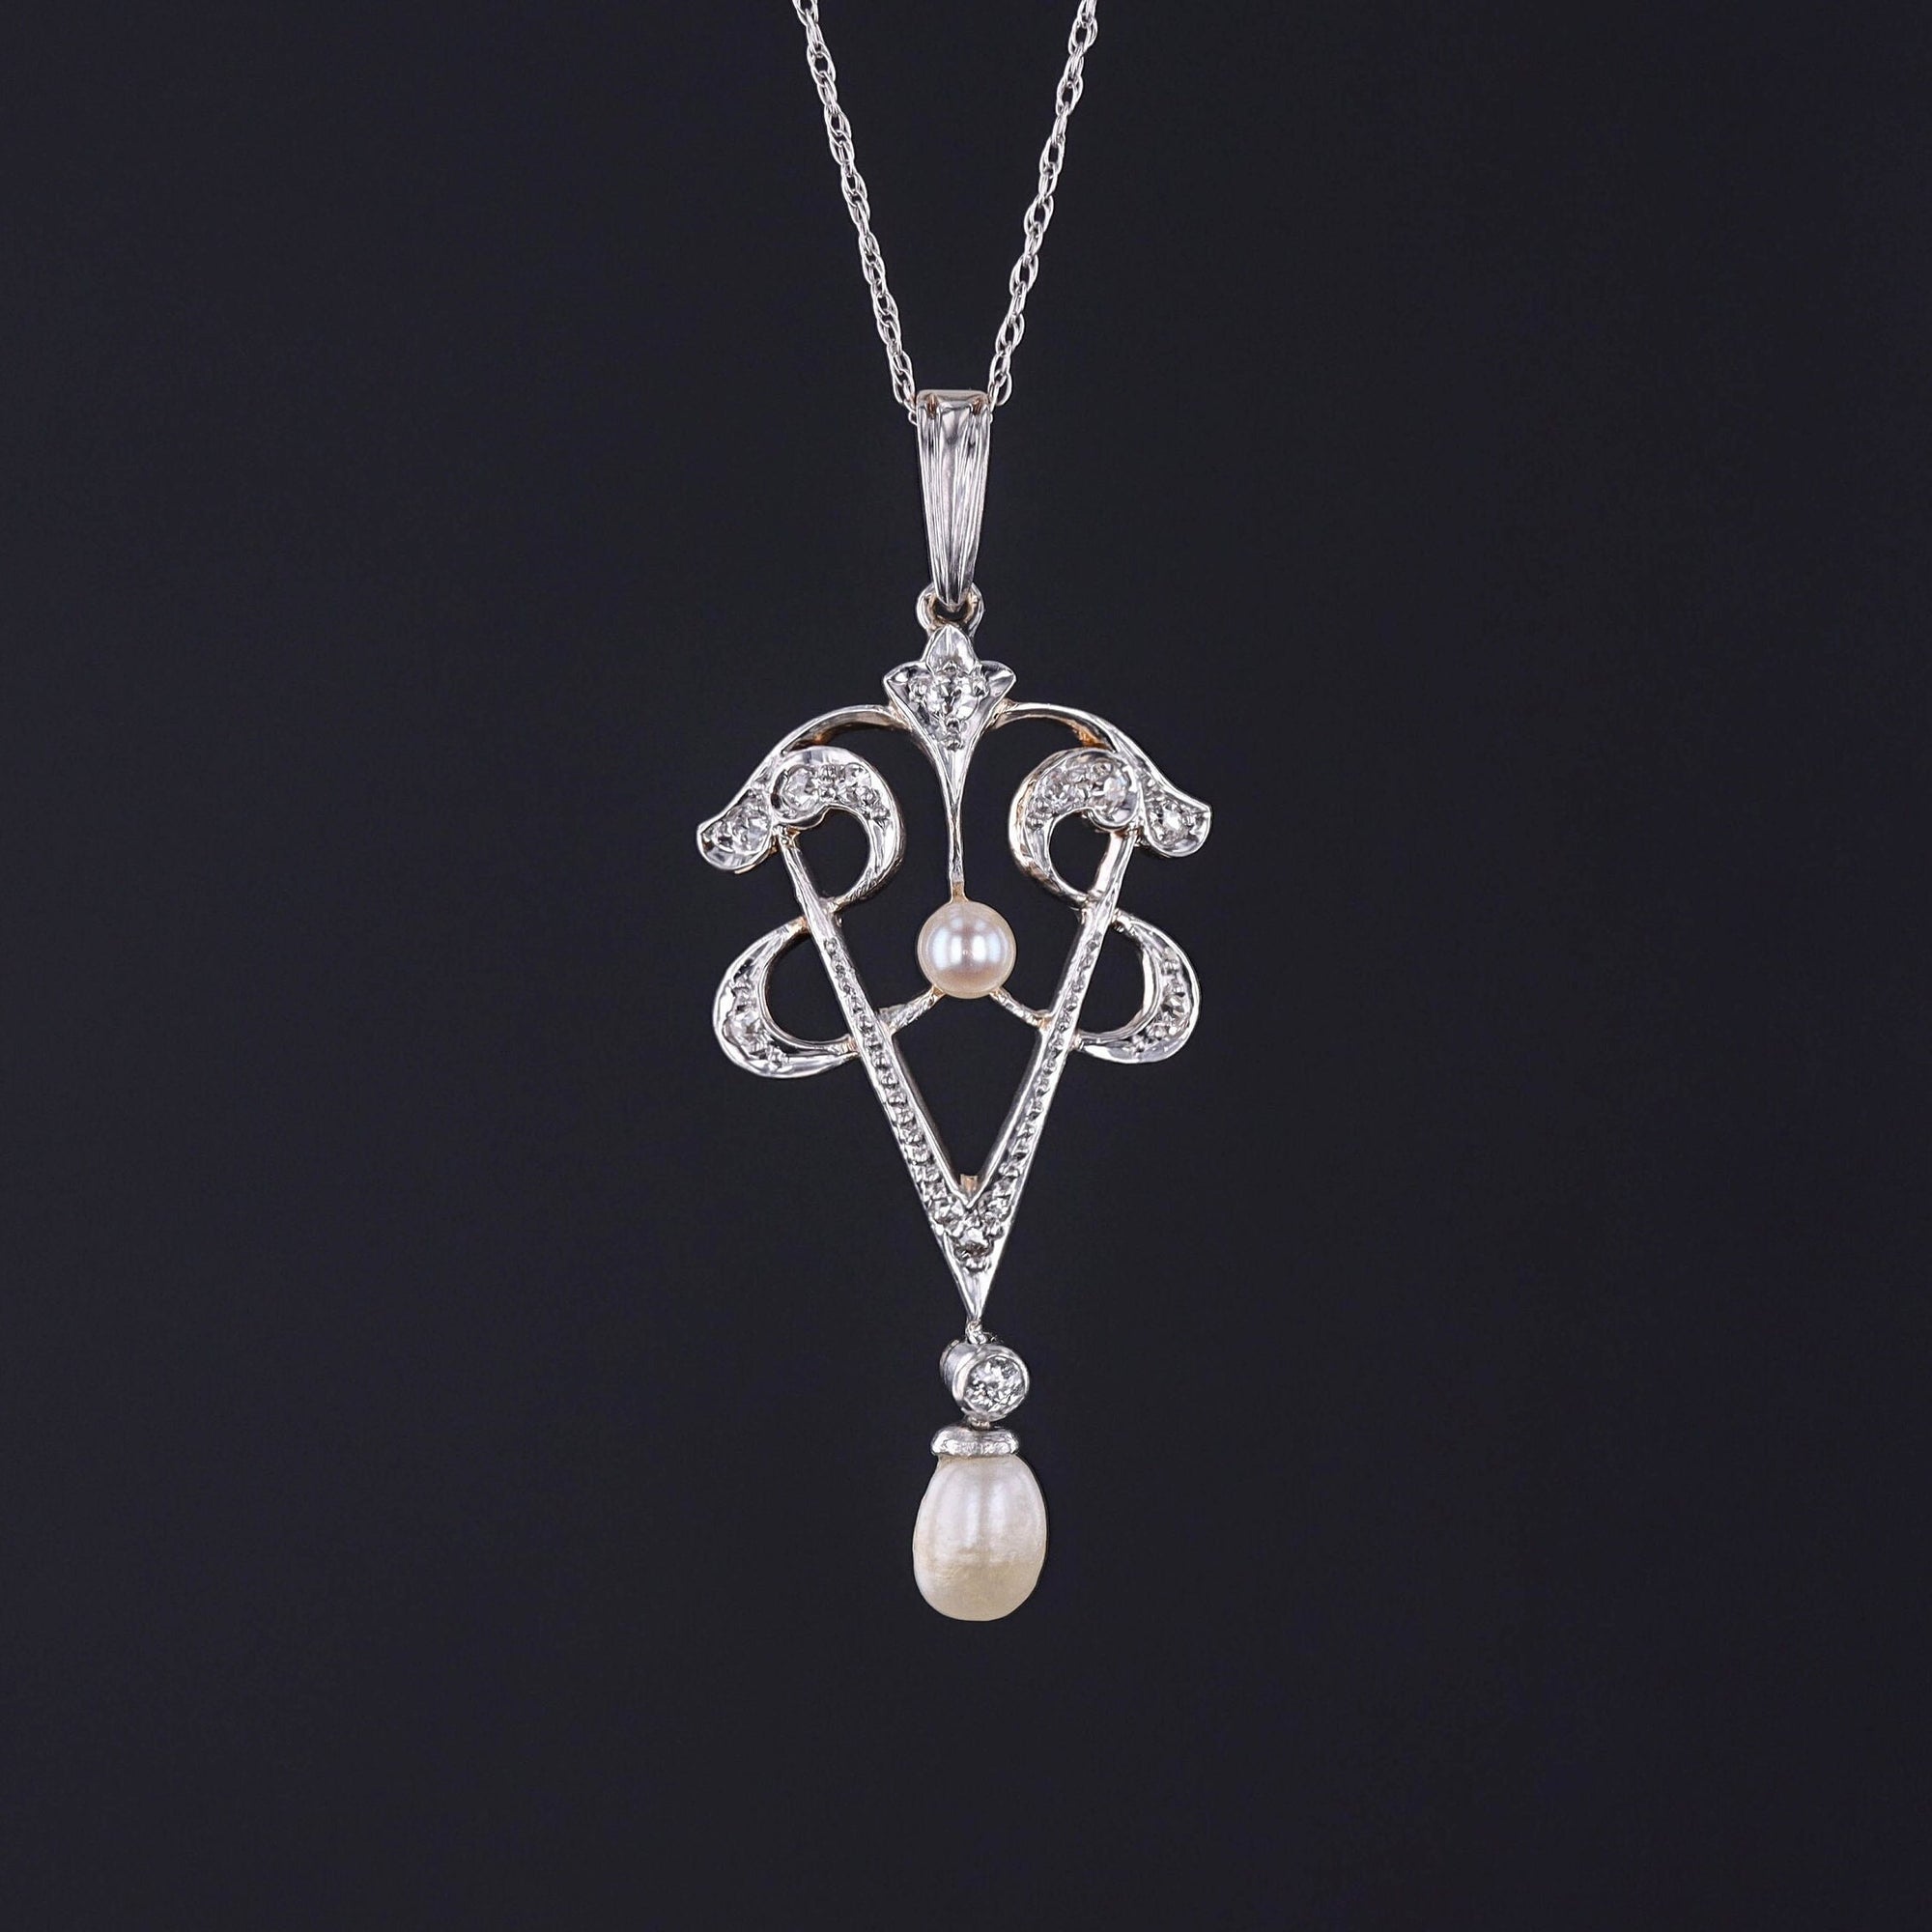 Step into the elegance of the early 20th century with this antique lavalier necklace. The pendant is platinum topped 14k gold and accented with diamonds and pearls. It is accompanied by an 18 inch, 10k white gold chain.